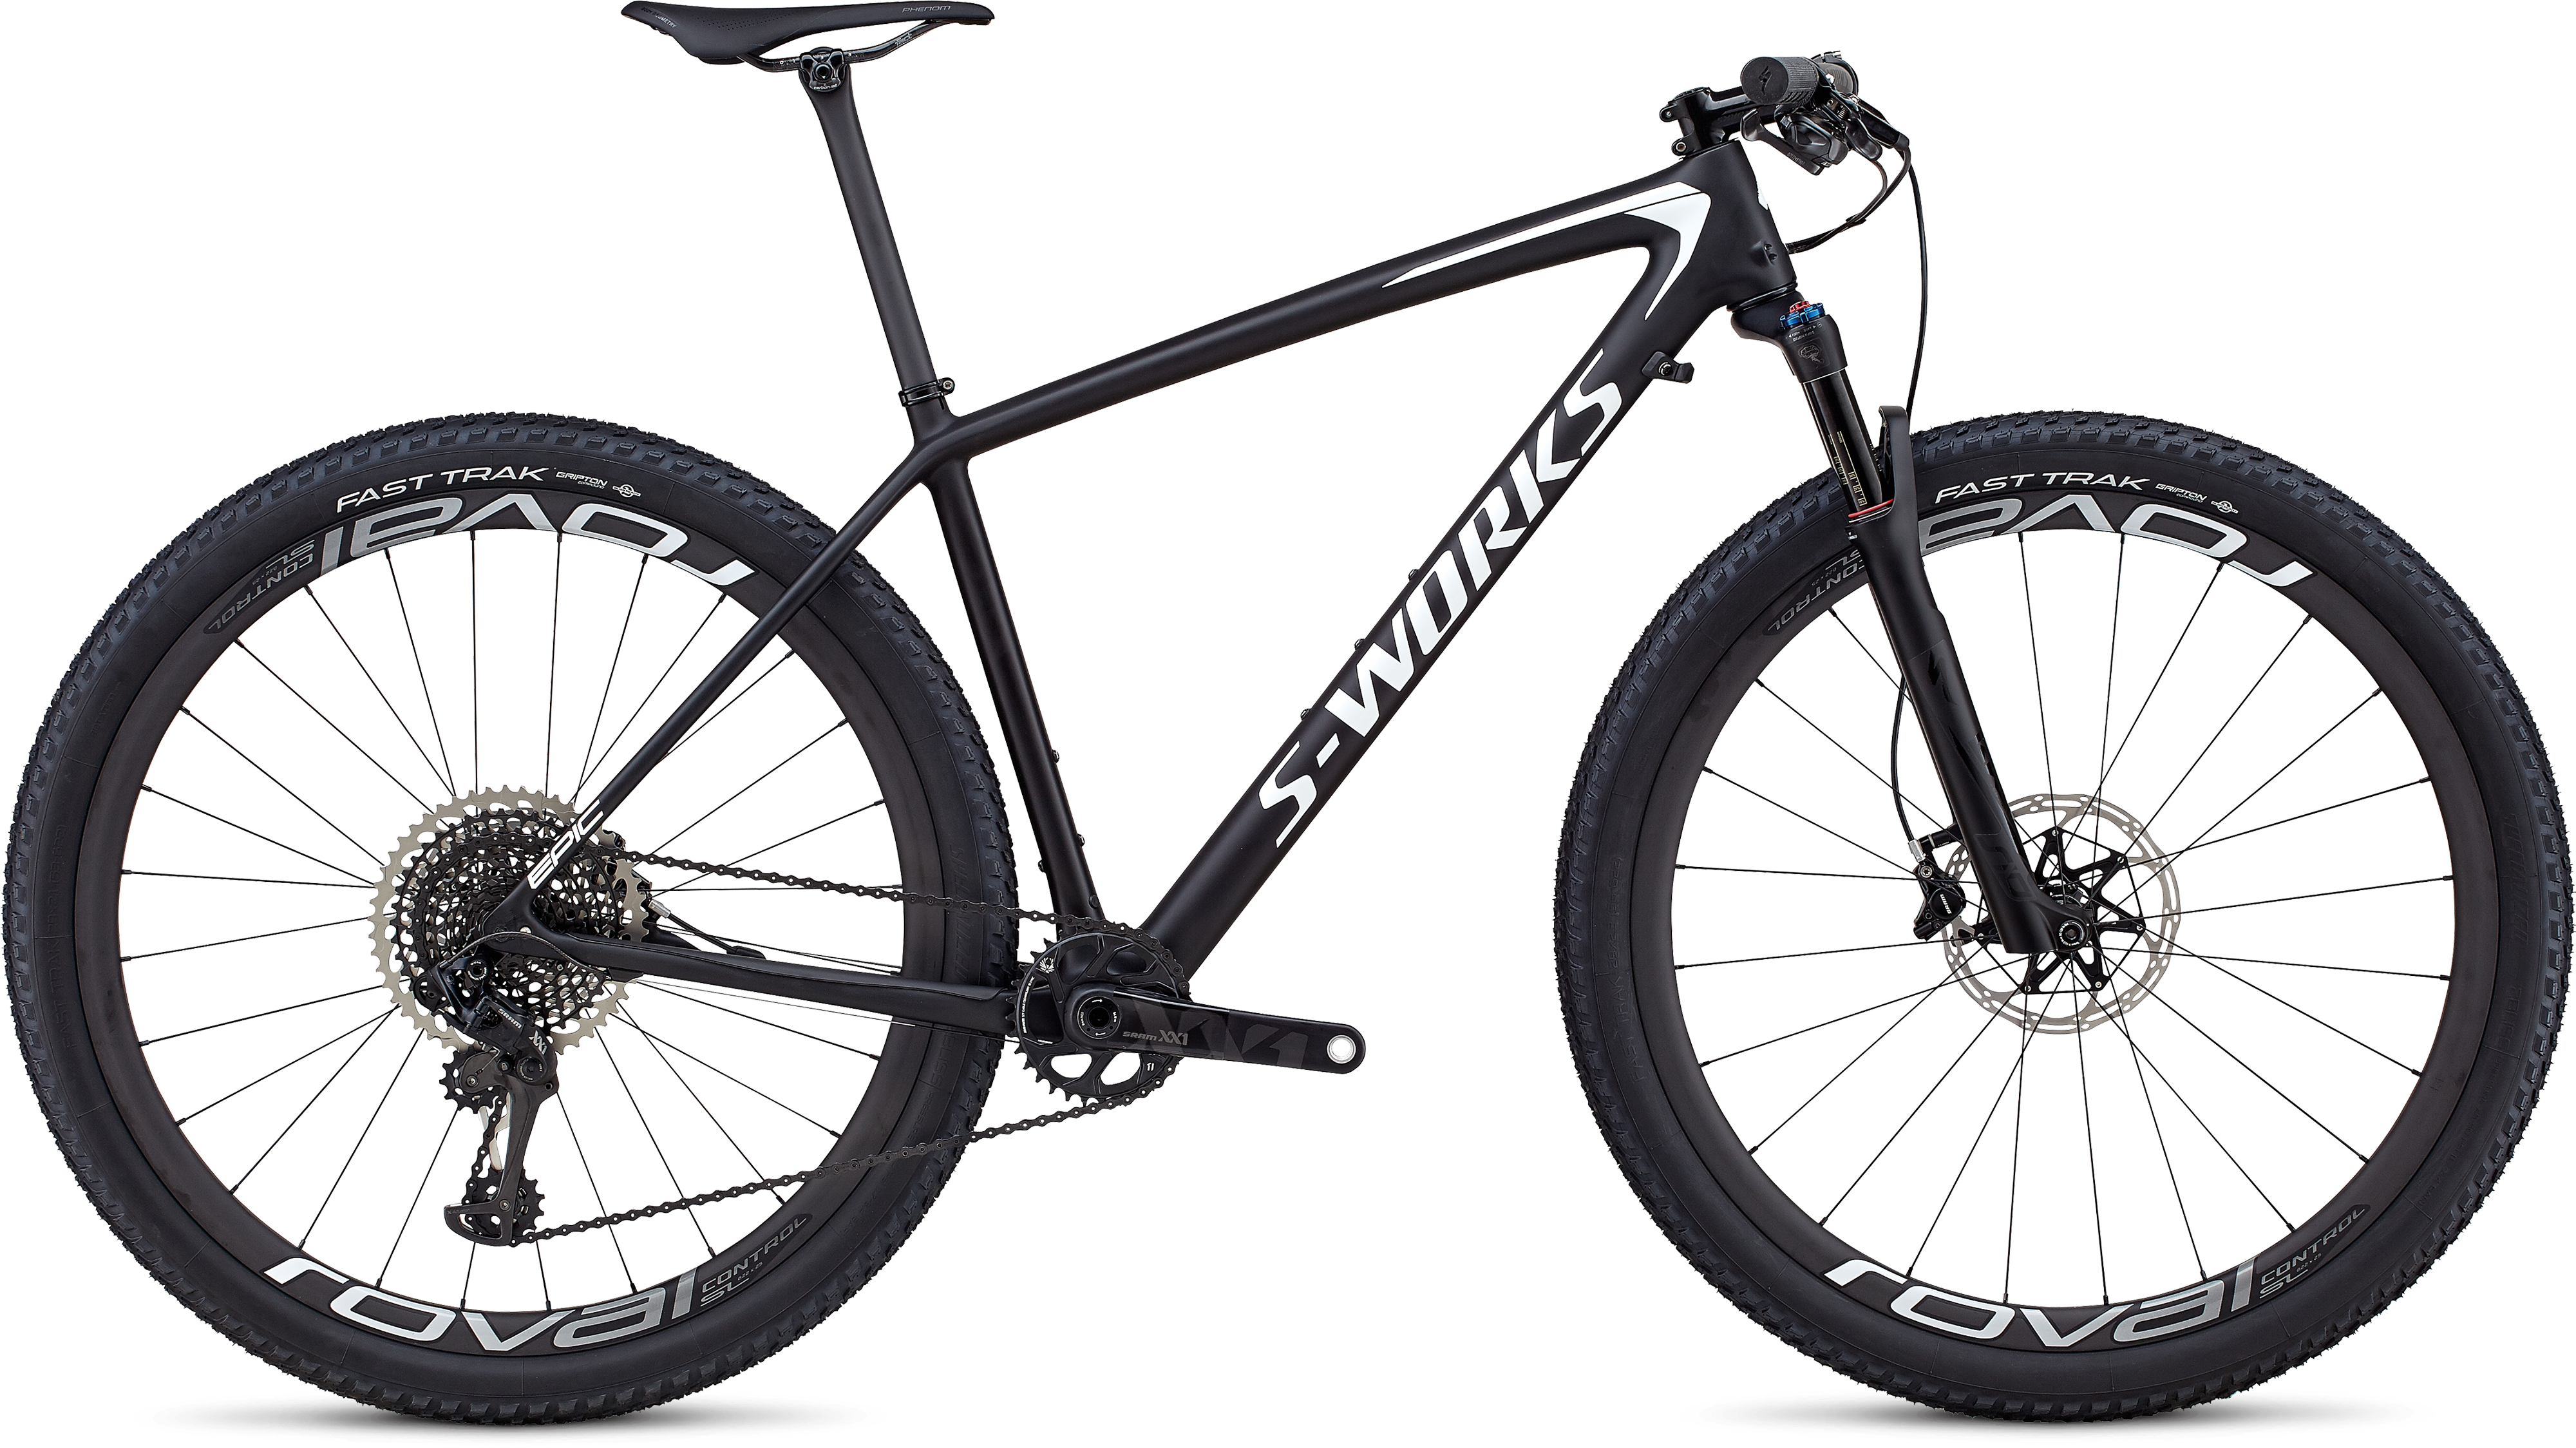 https://assets.specialized.com/i/specialized/97118-03_EPIC-HT-MEN_SW-CARBON-SRAM-29_BLK-METWHTSIL_HERO?$scom-pdp-product-image$&fmt=auto